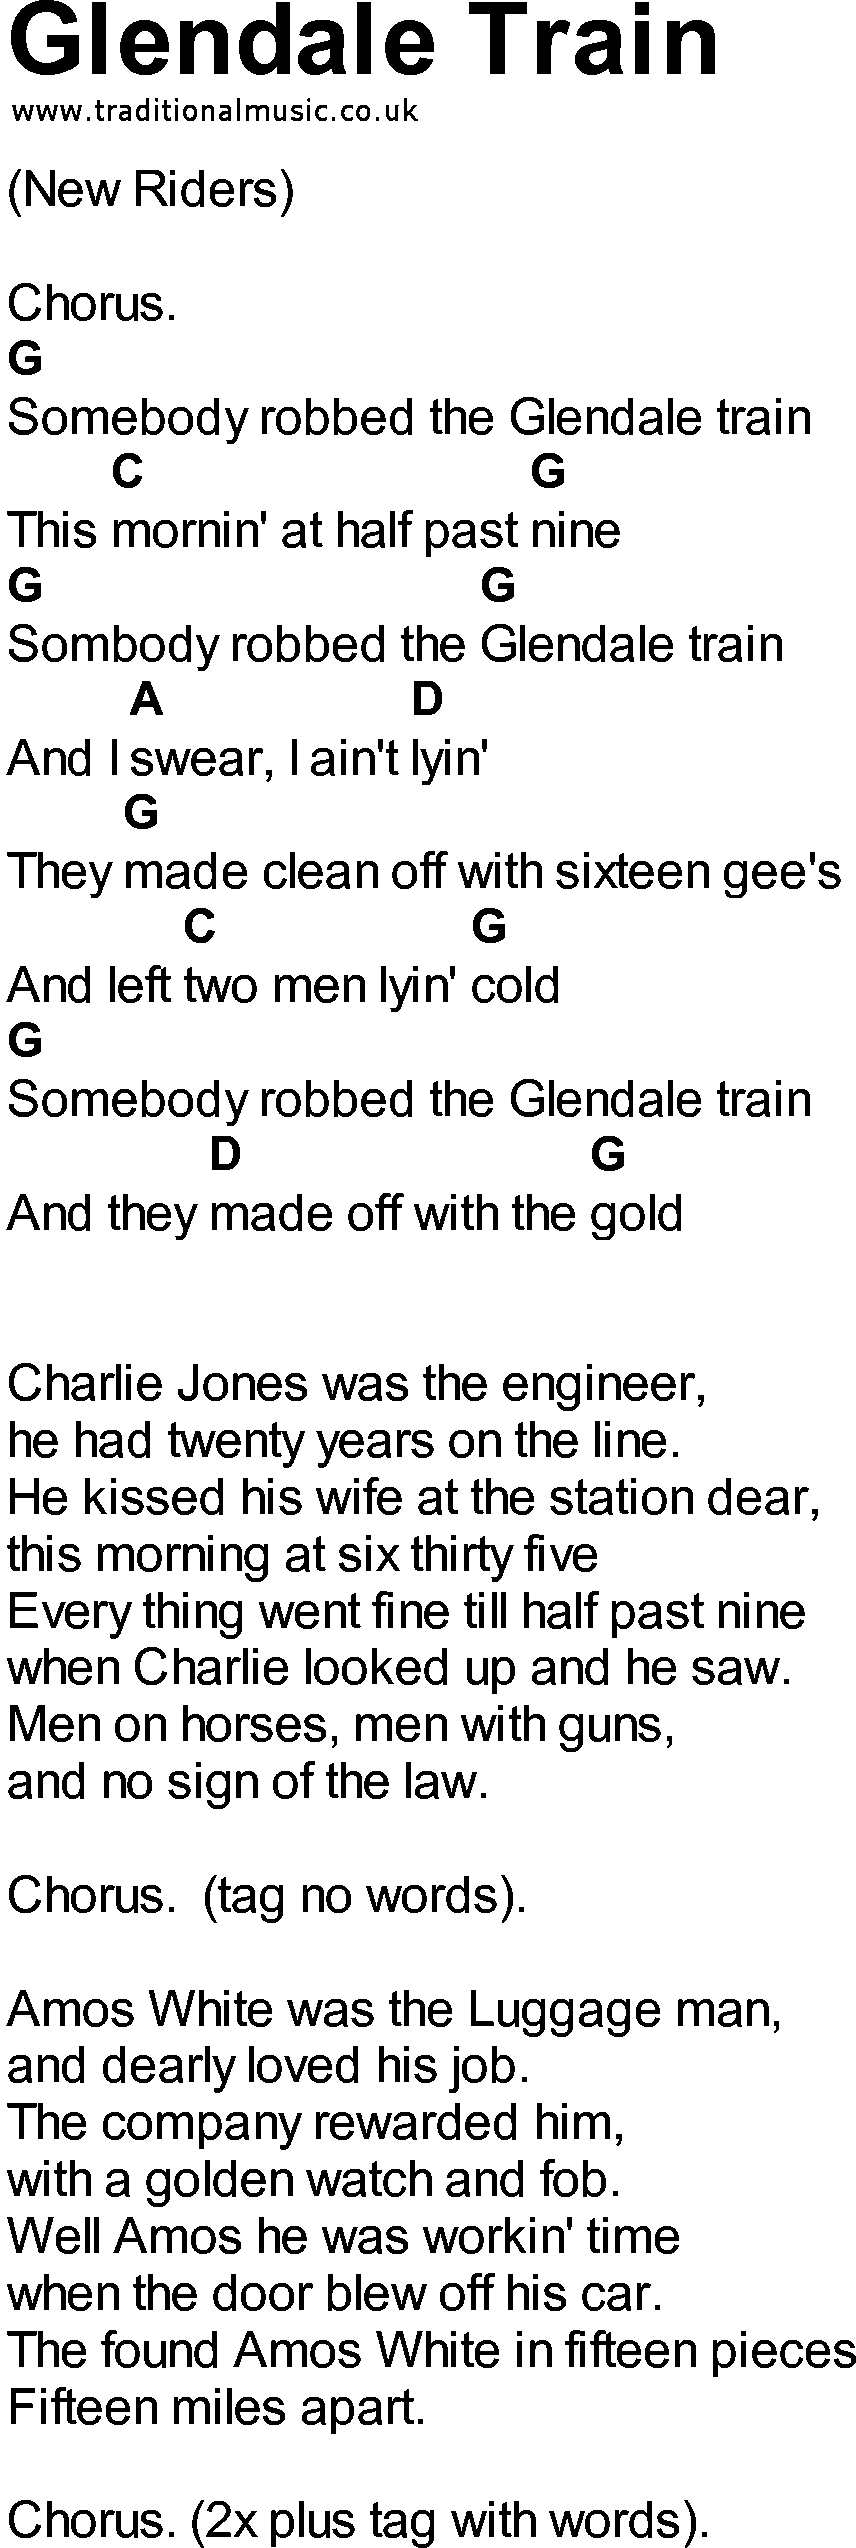 Bluegrass songs with chords - Glendale Train